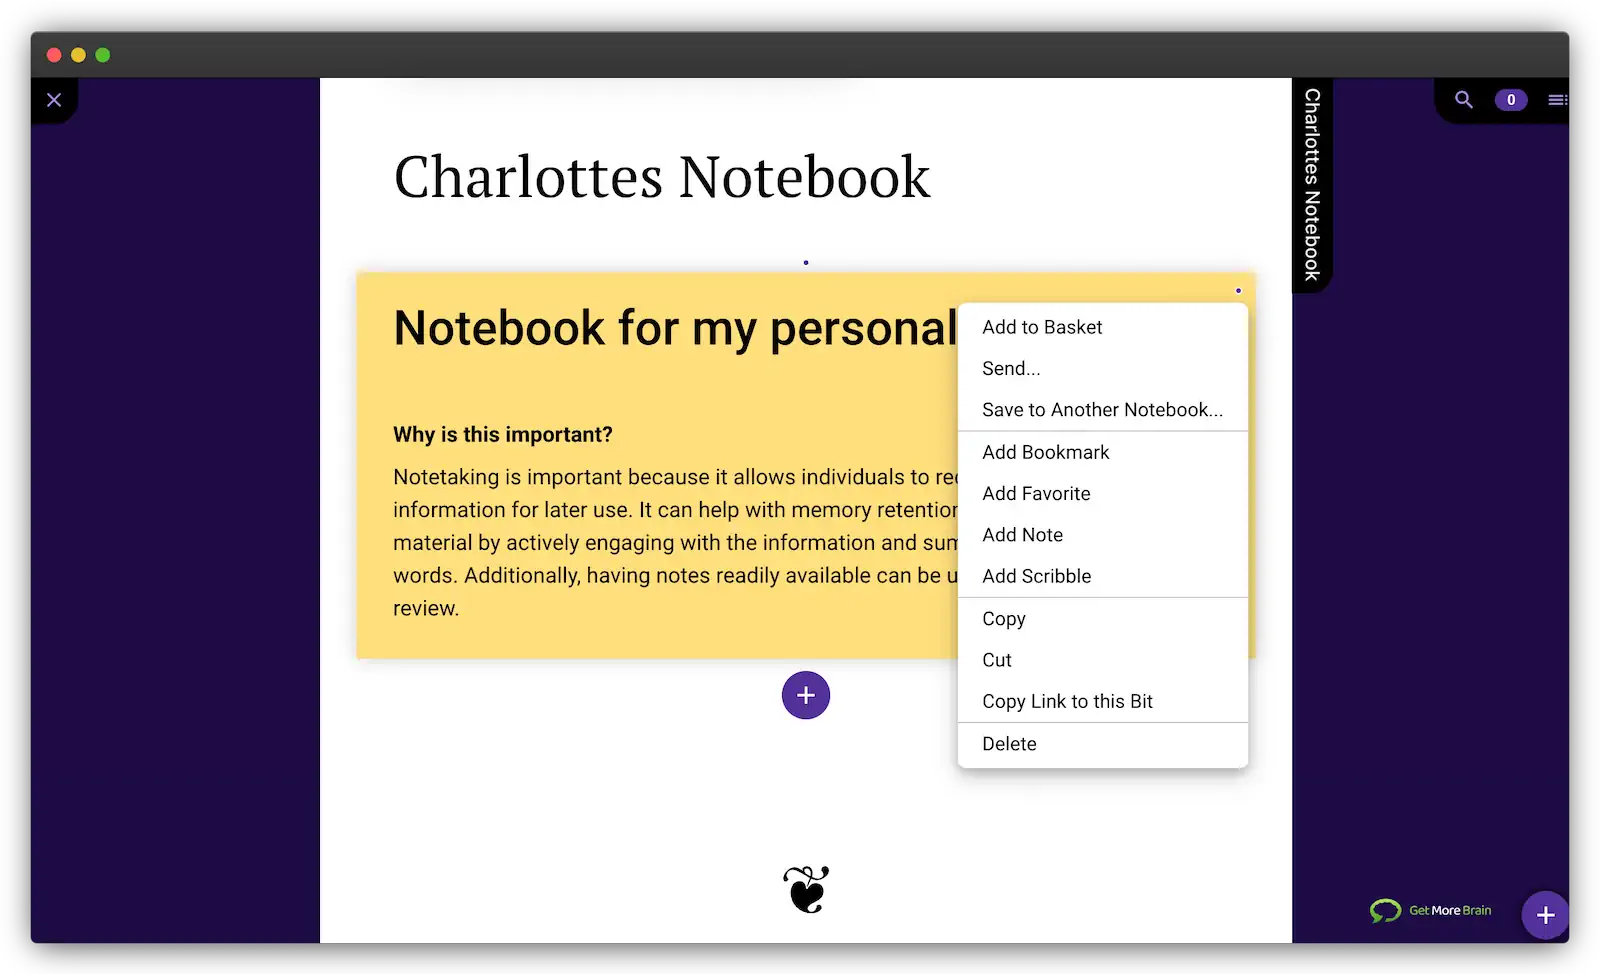 The image shows the Workspace of Get More Brain with your personal Notebooks. You can edit all your own bits, add bookmarks and annotations or send it to your Contacts.